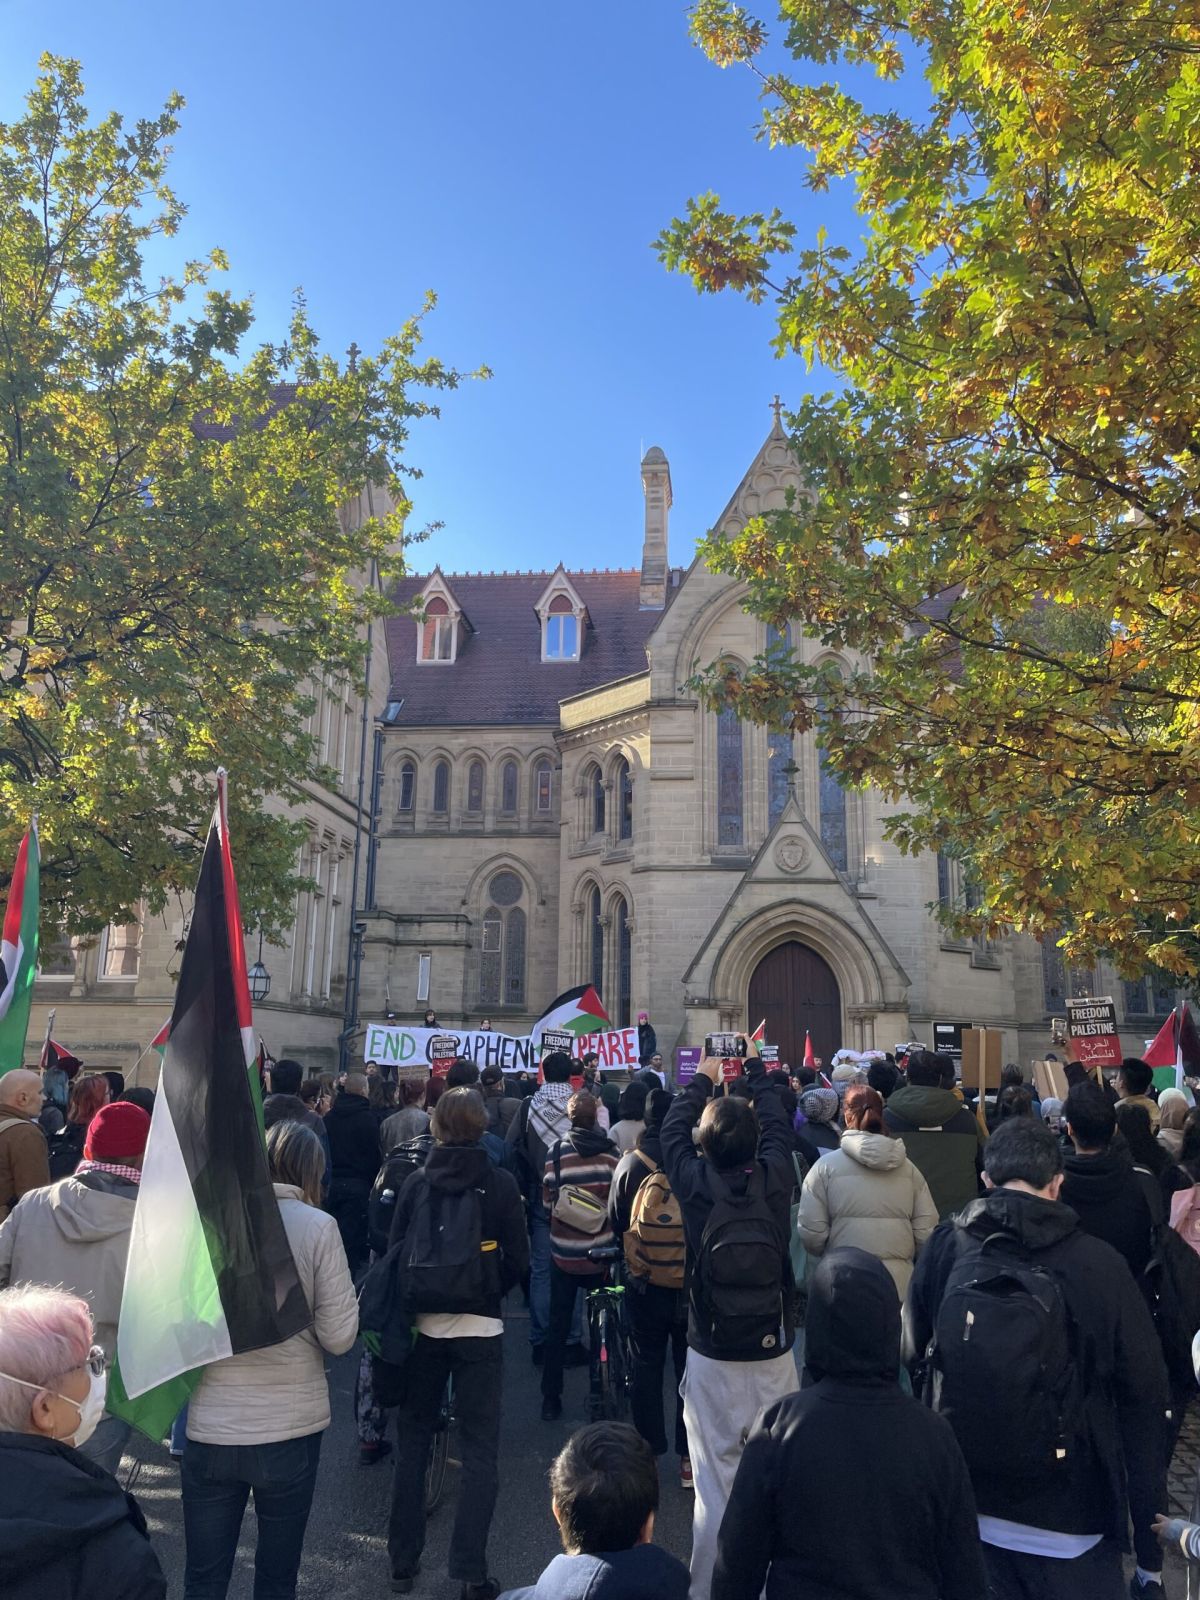 “Shame on you!”: Protesters condemn University of Manchester during pro-Palestine protest